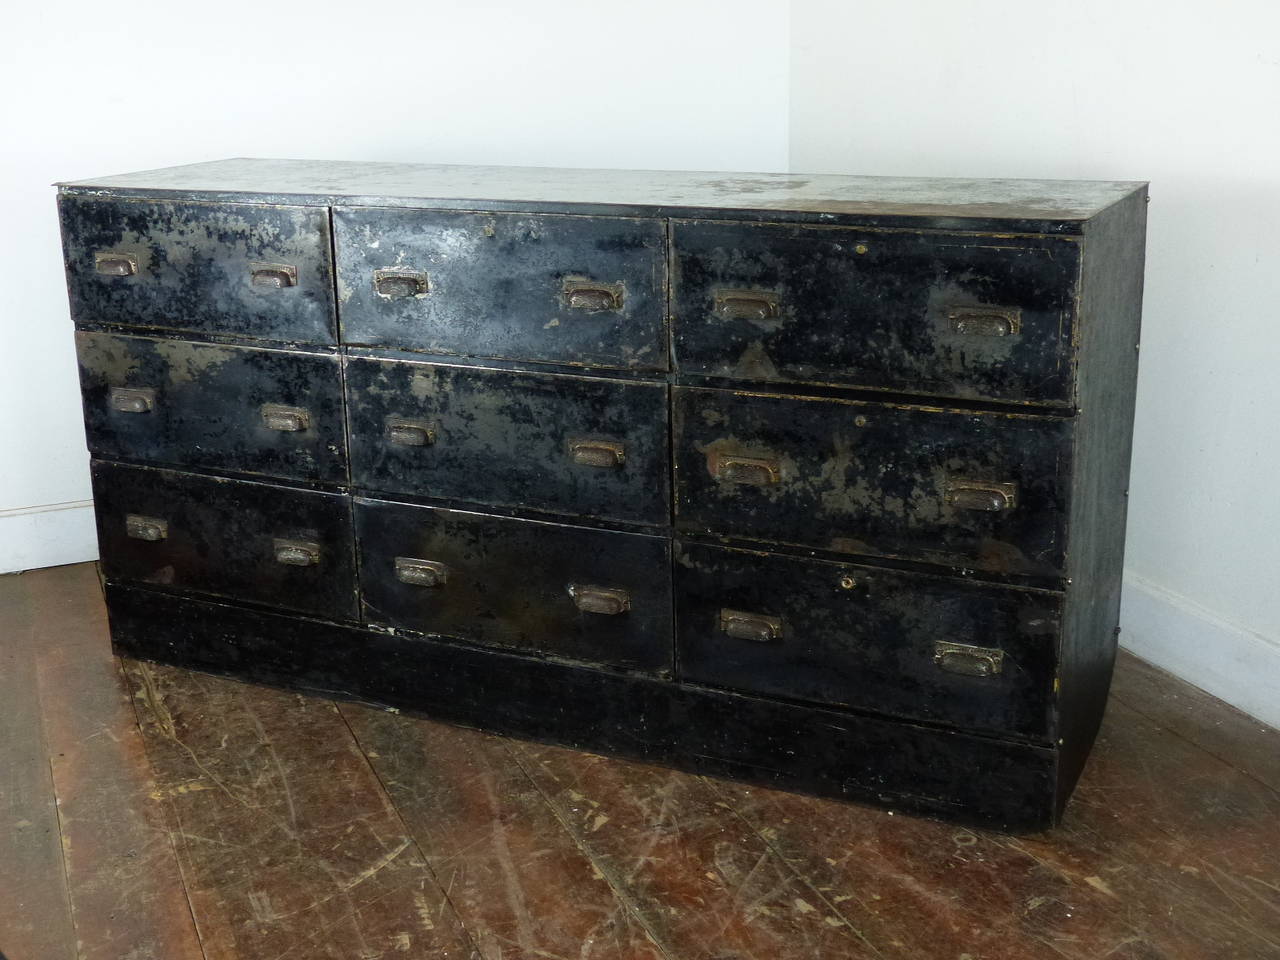 Excellent metal cabinet retaining traces of original black finish with stencilling hilights. The original handles are a detailed brass and are original to the piece.
Drawers are functional .